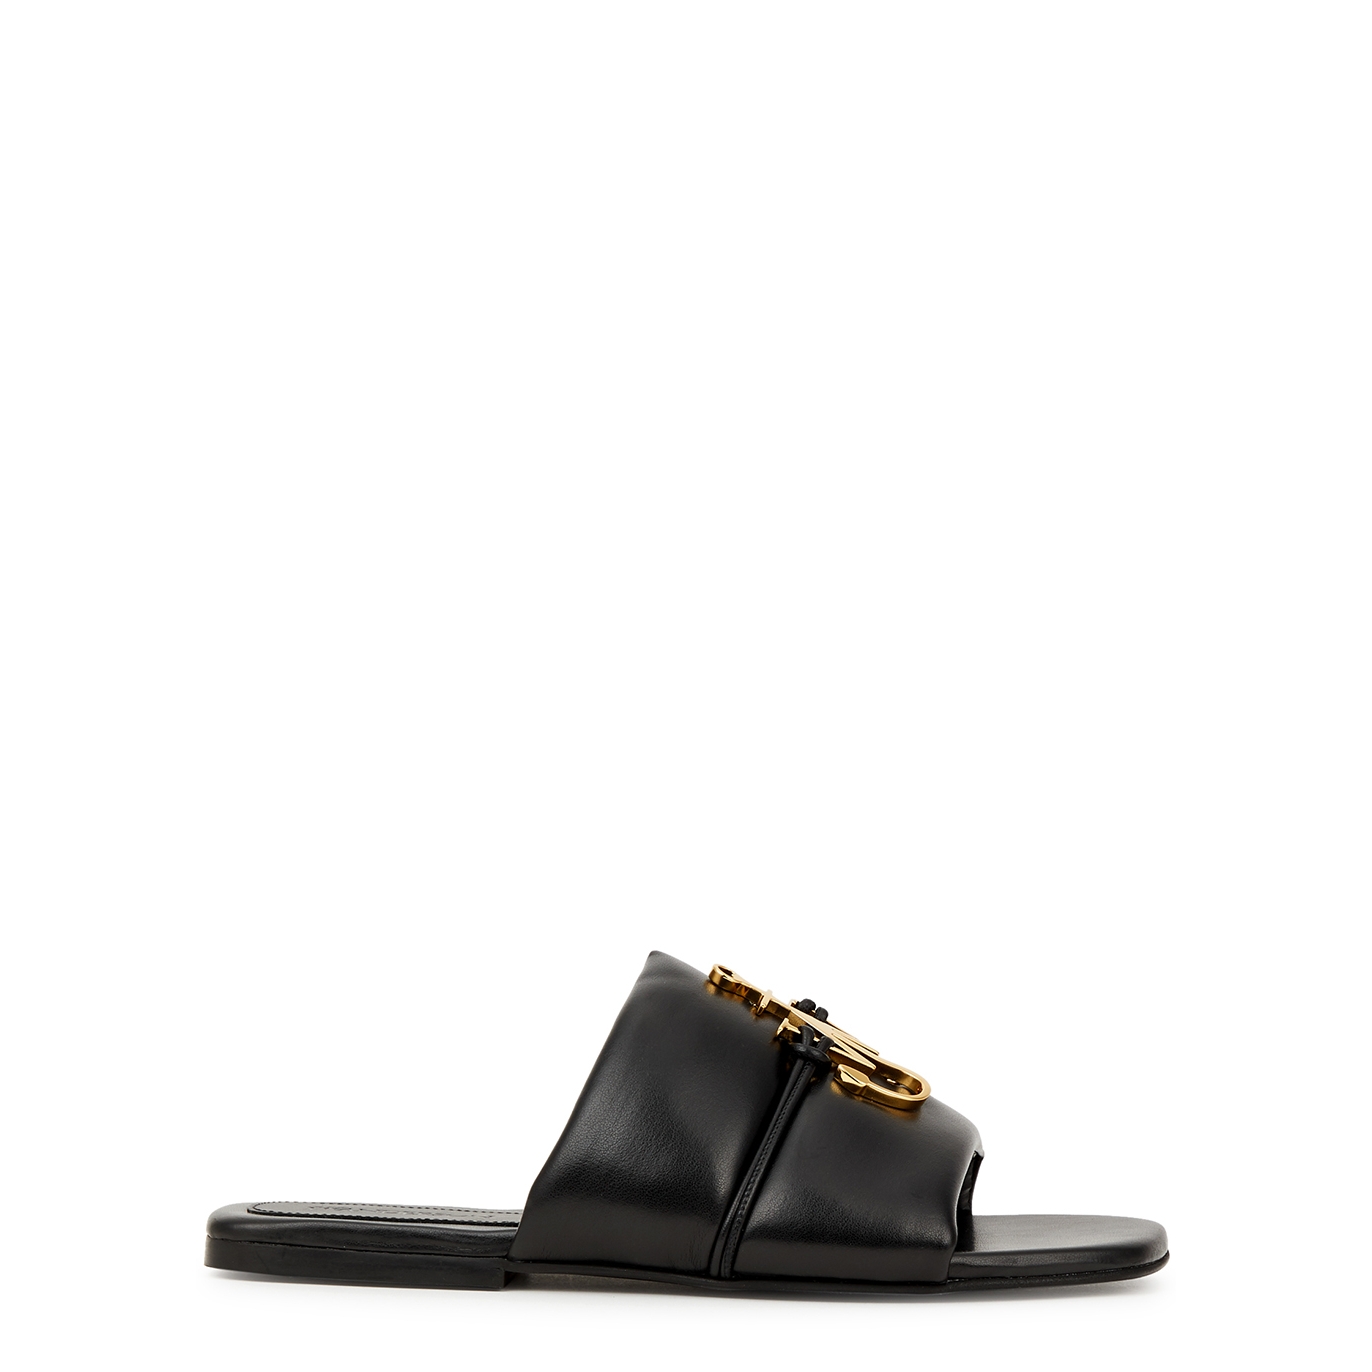 JW ANDERSON ANCHOR PADDED LEATHER SLIDERS